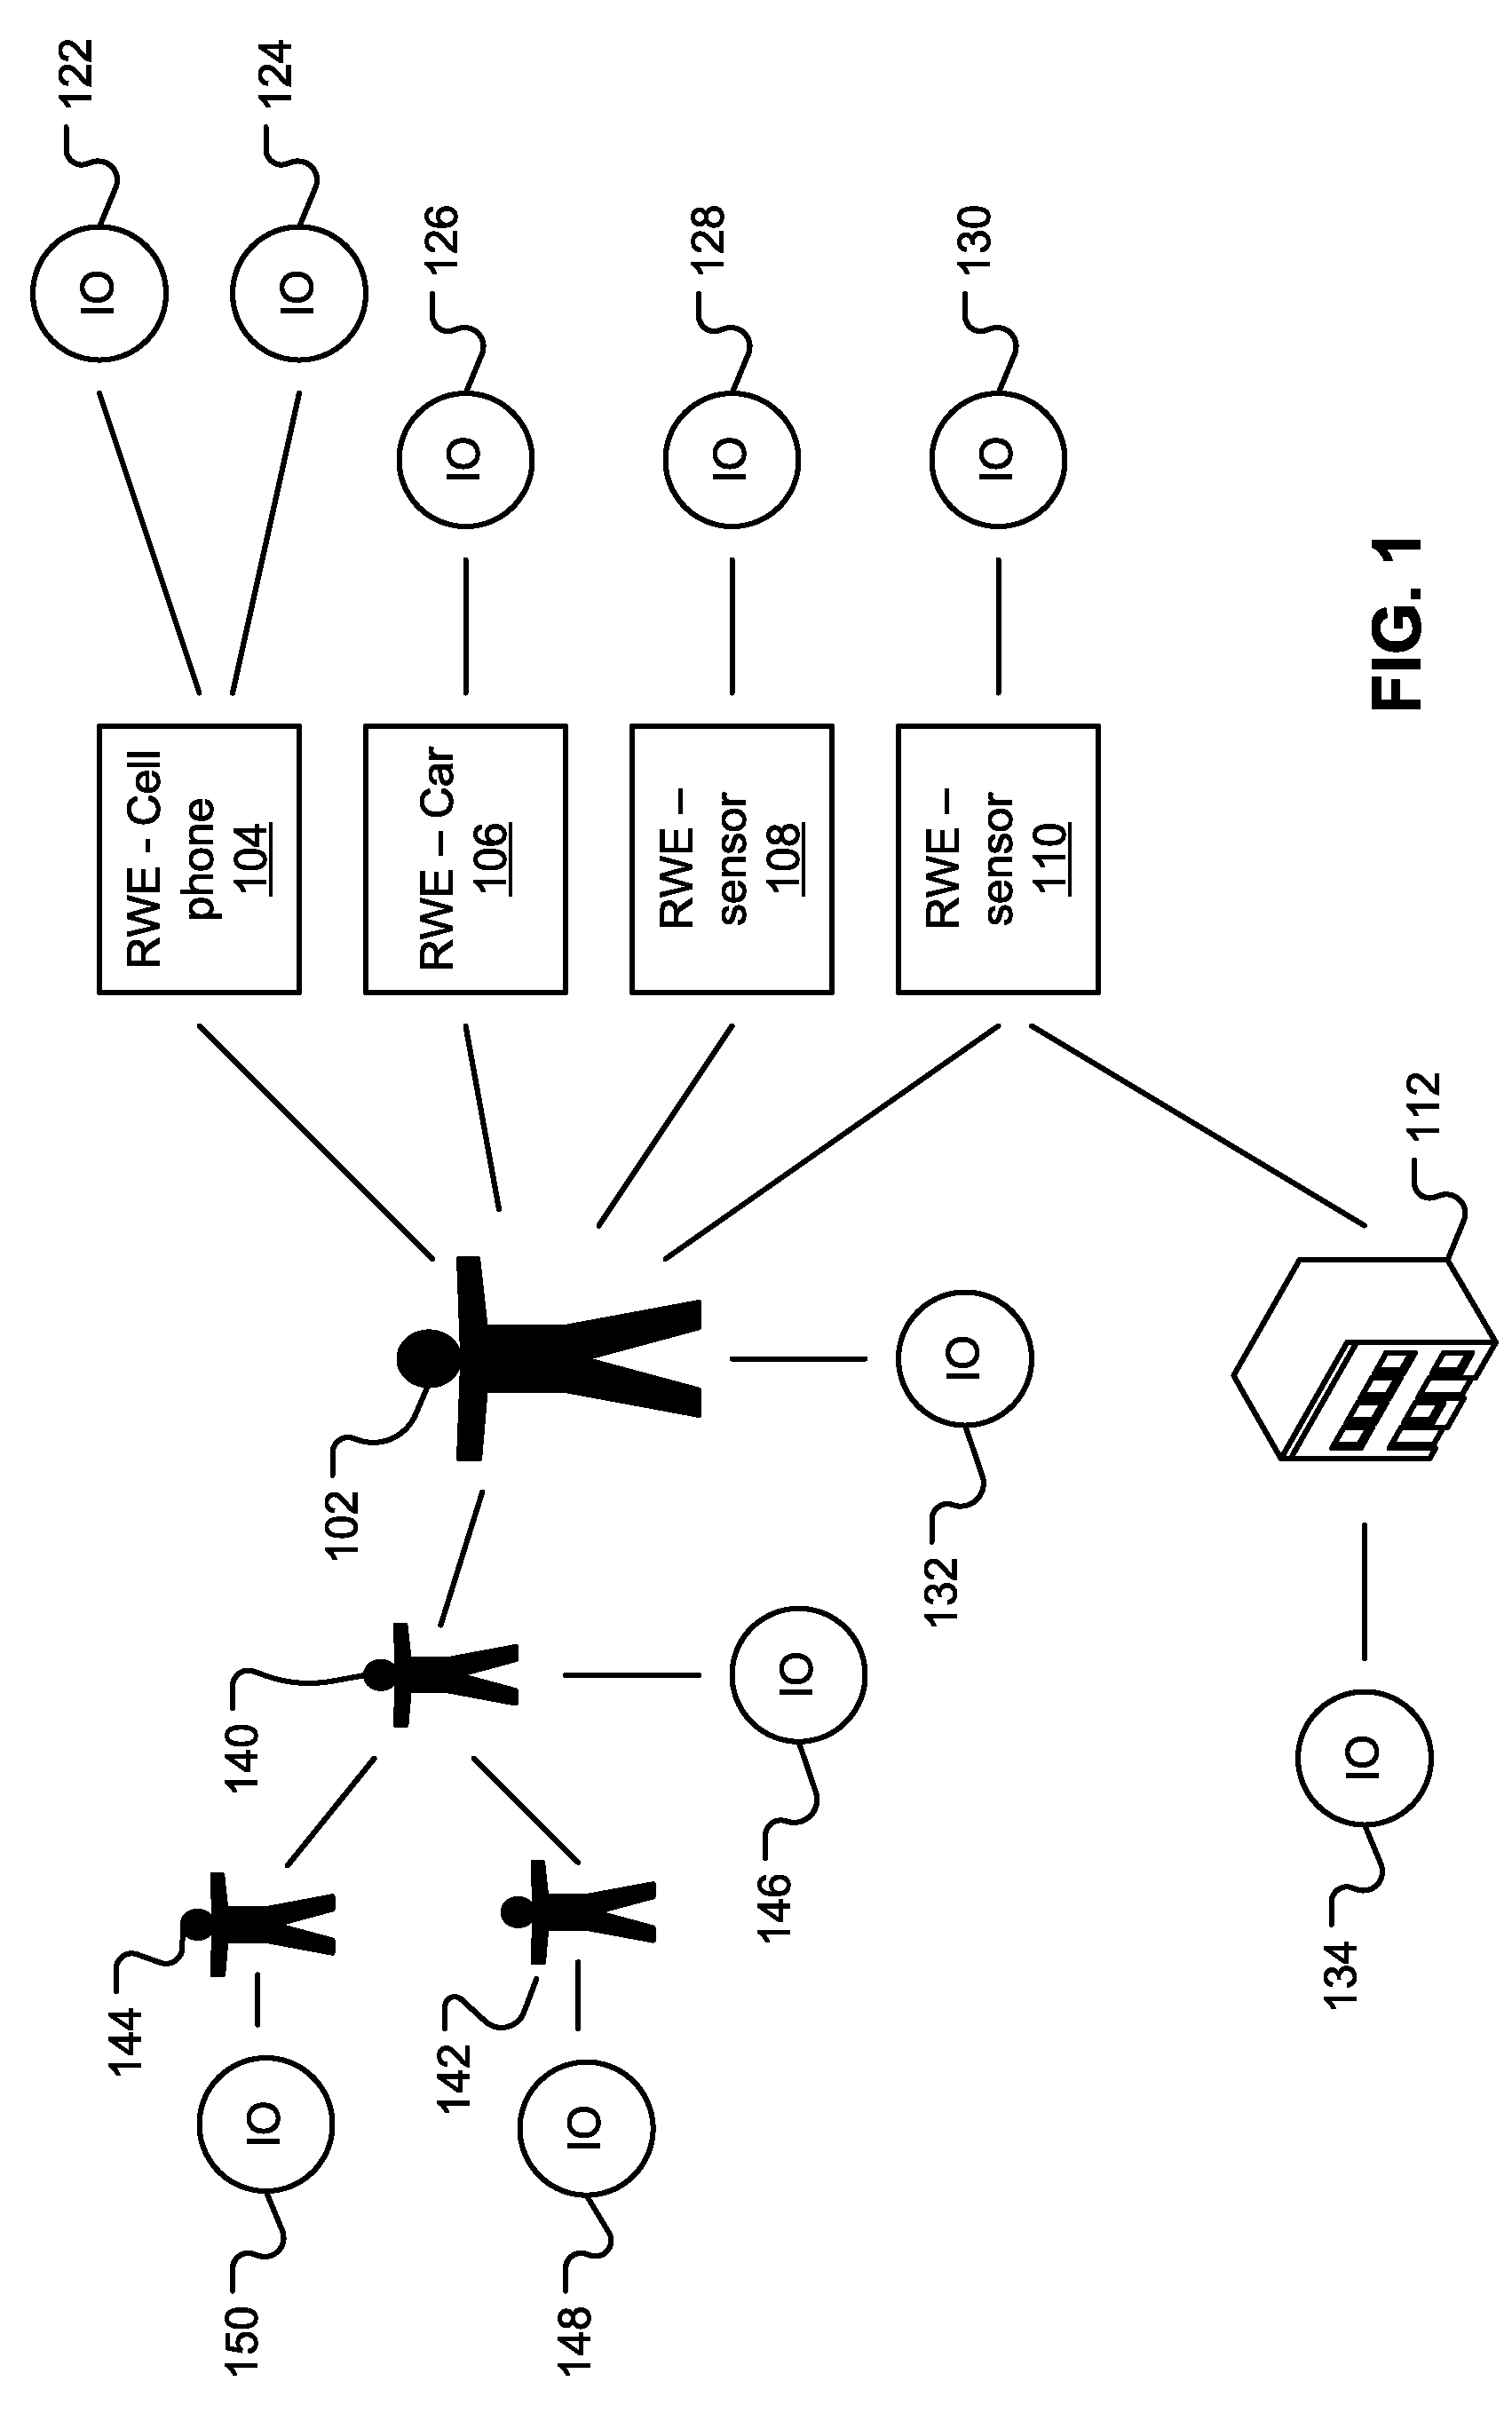 System and method for automated service recommendations